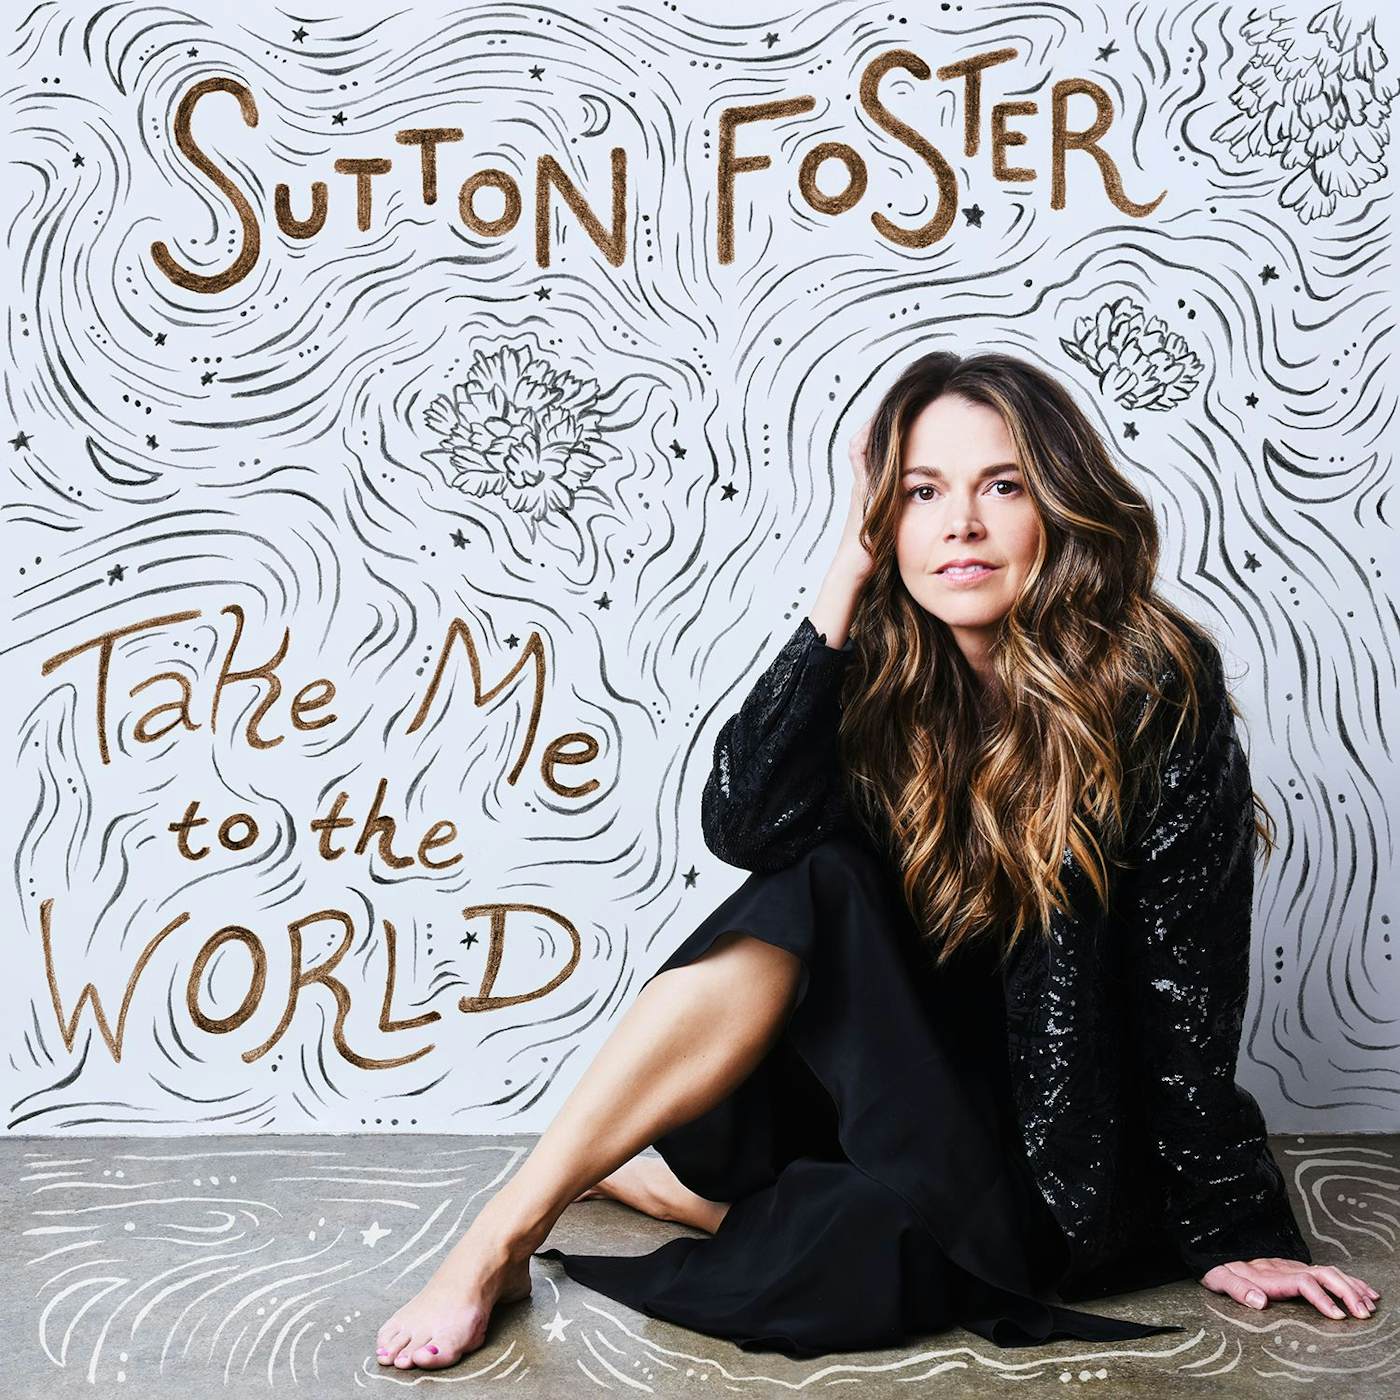 Sutton Foster TAKE ME TO THE WORLD CD